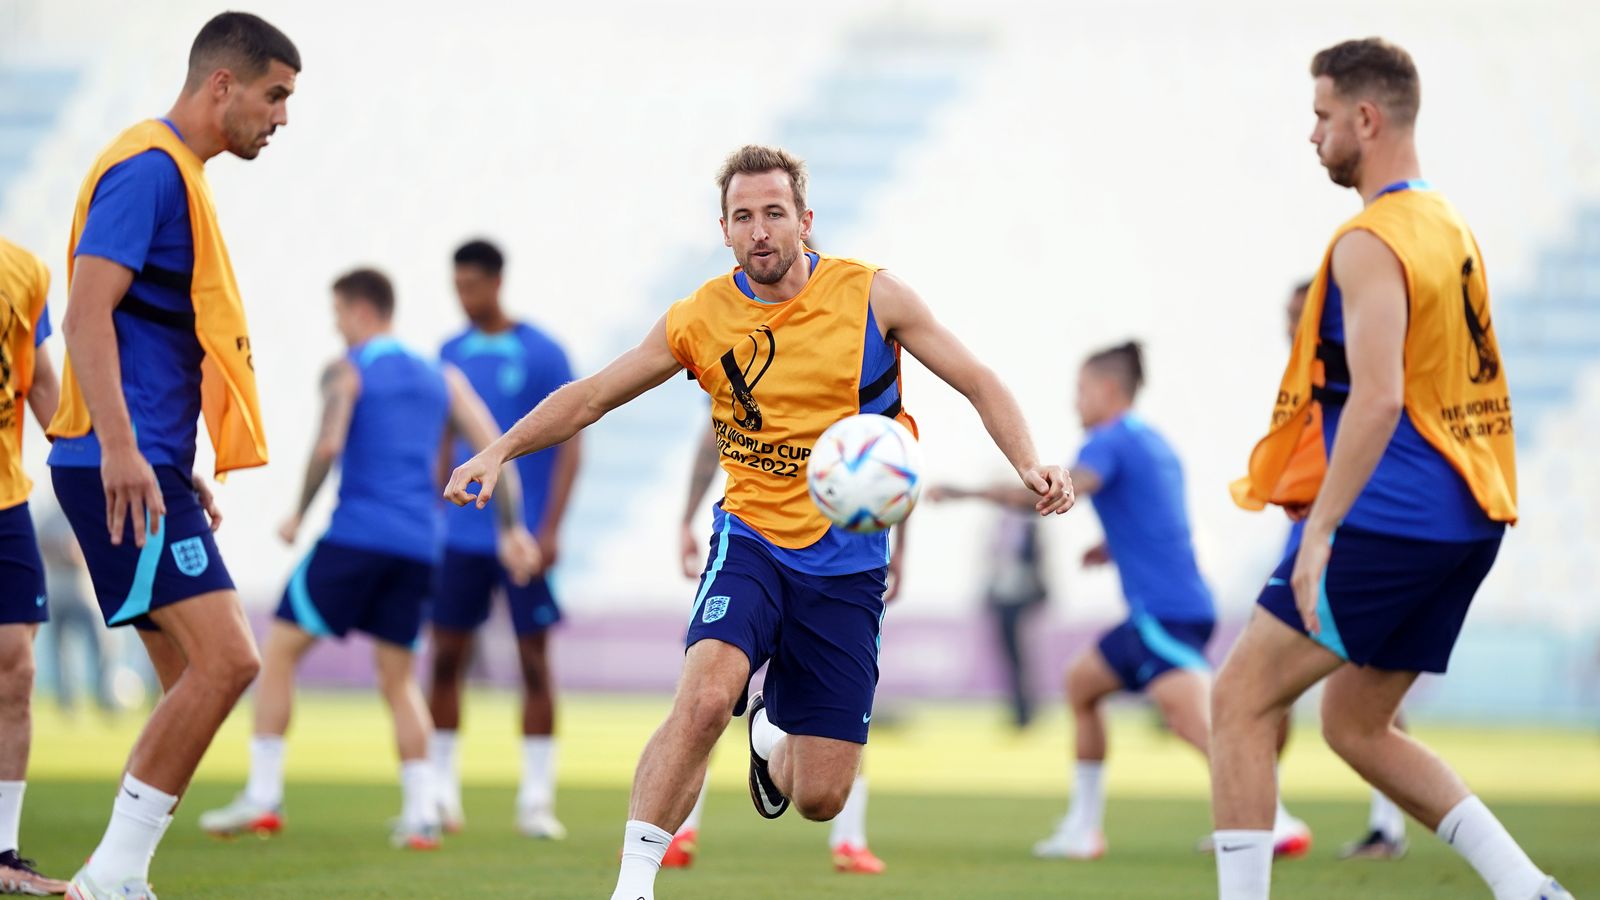 World Cup 2022: Kane addresses goal drought as he prepares to lead England into World Cup clash with Senegal | World News